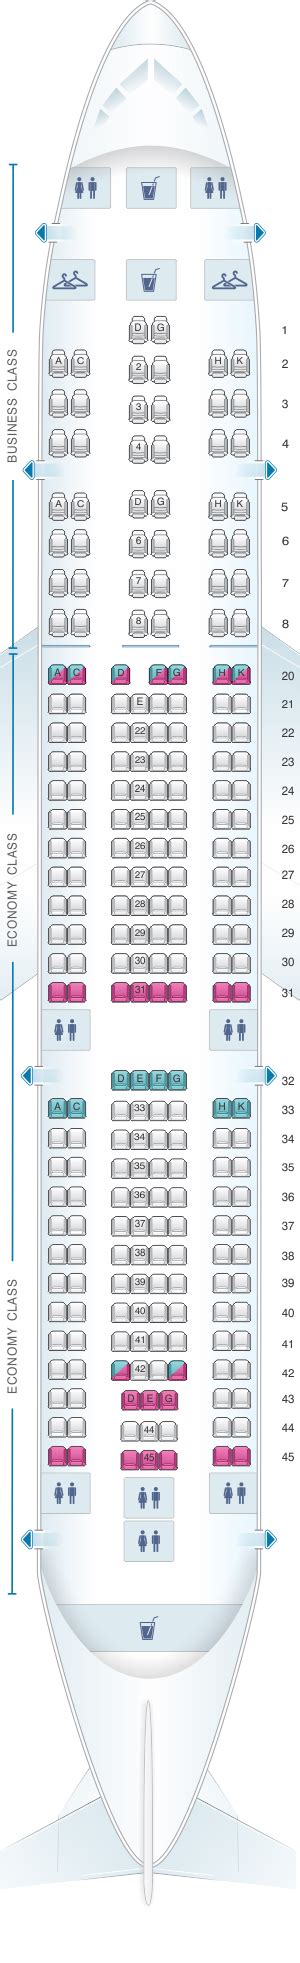 Airbus A330 200 Seating Plan Delta Elcho Table